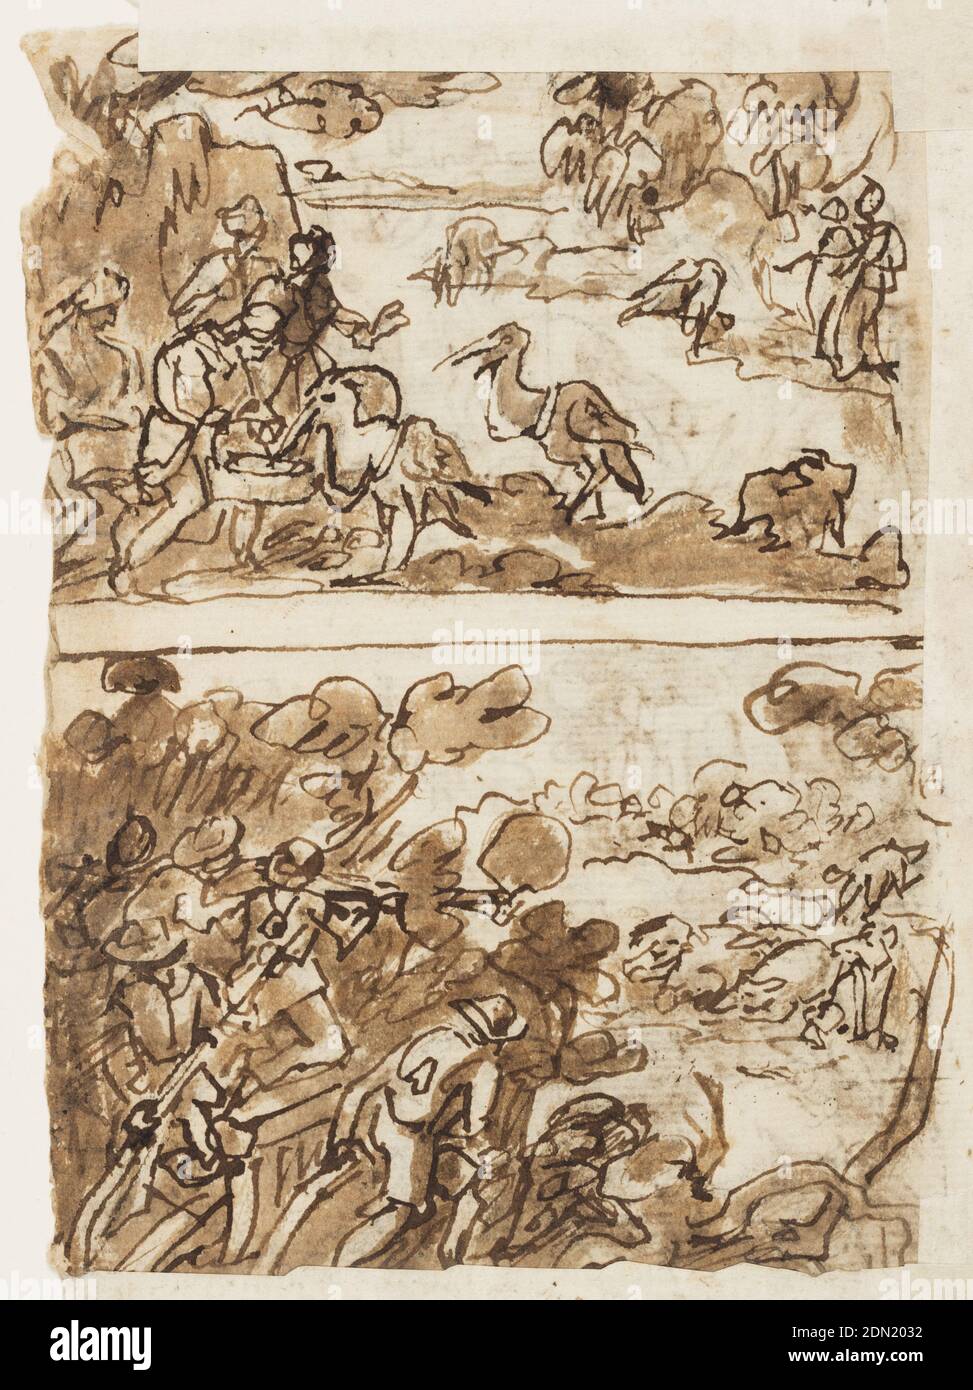 Four Preliminary Designs for the Venetiones Series: Recto, above: Fishing for Tuna; Recto, below: Hunting crocodile with a Pig as Bait; Verso, above: Indians catching fish with the help of pelicans; Verso, below: Boar hunt with Shotguns;, Jan van der Straet, called Stradanus, Flemish, 1523–1605, Pen and ink, brush and brown wash on paper, Vertical rectangle. Obverse: Two scenes - top, Fishing. Men in open tuna fishing boats have caught fish in large nets; below, alligator hunt. Pigs used as bait. Hunters at left. Reverse: two scenes, top - fishing, using pelicans Stock Photo